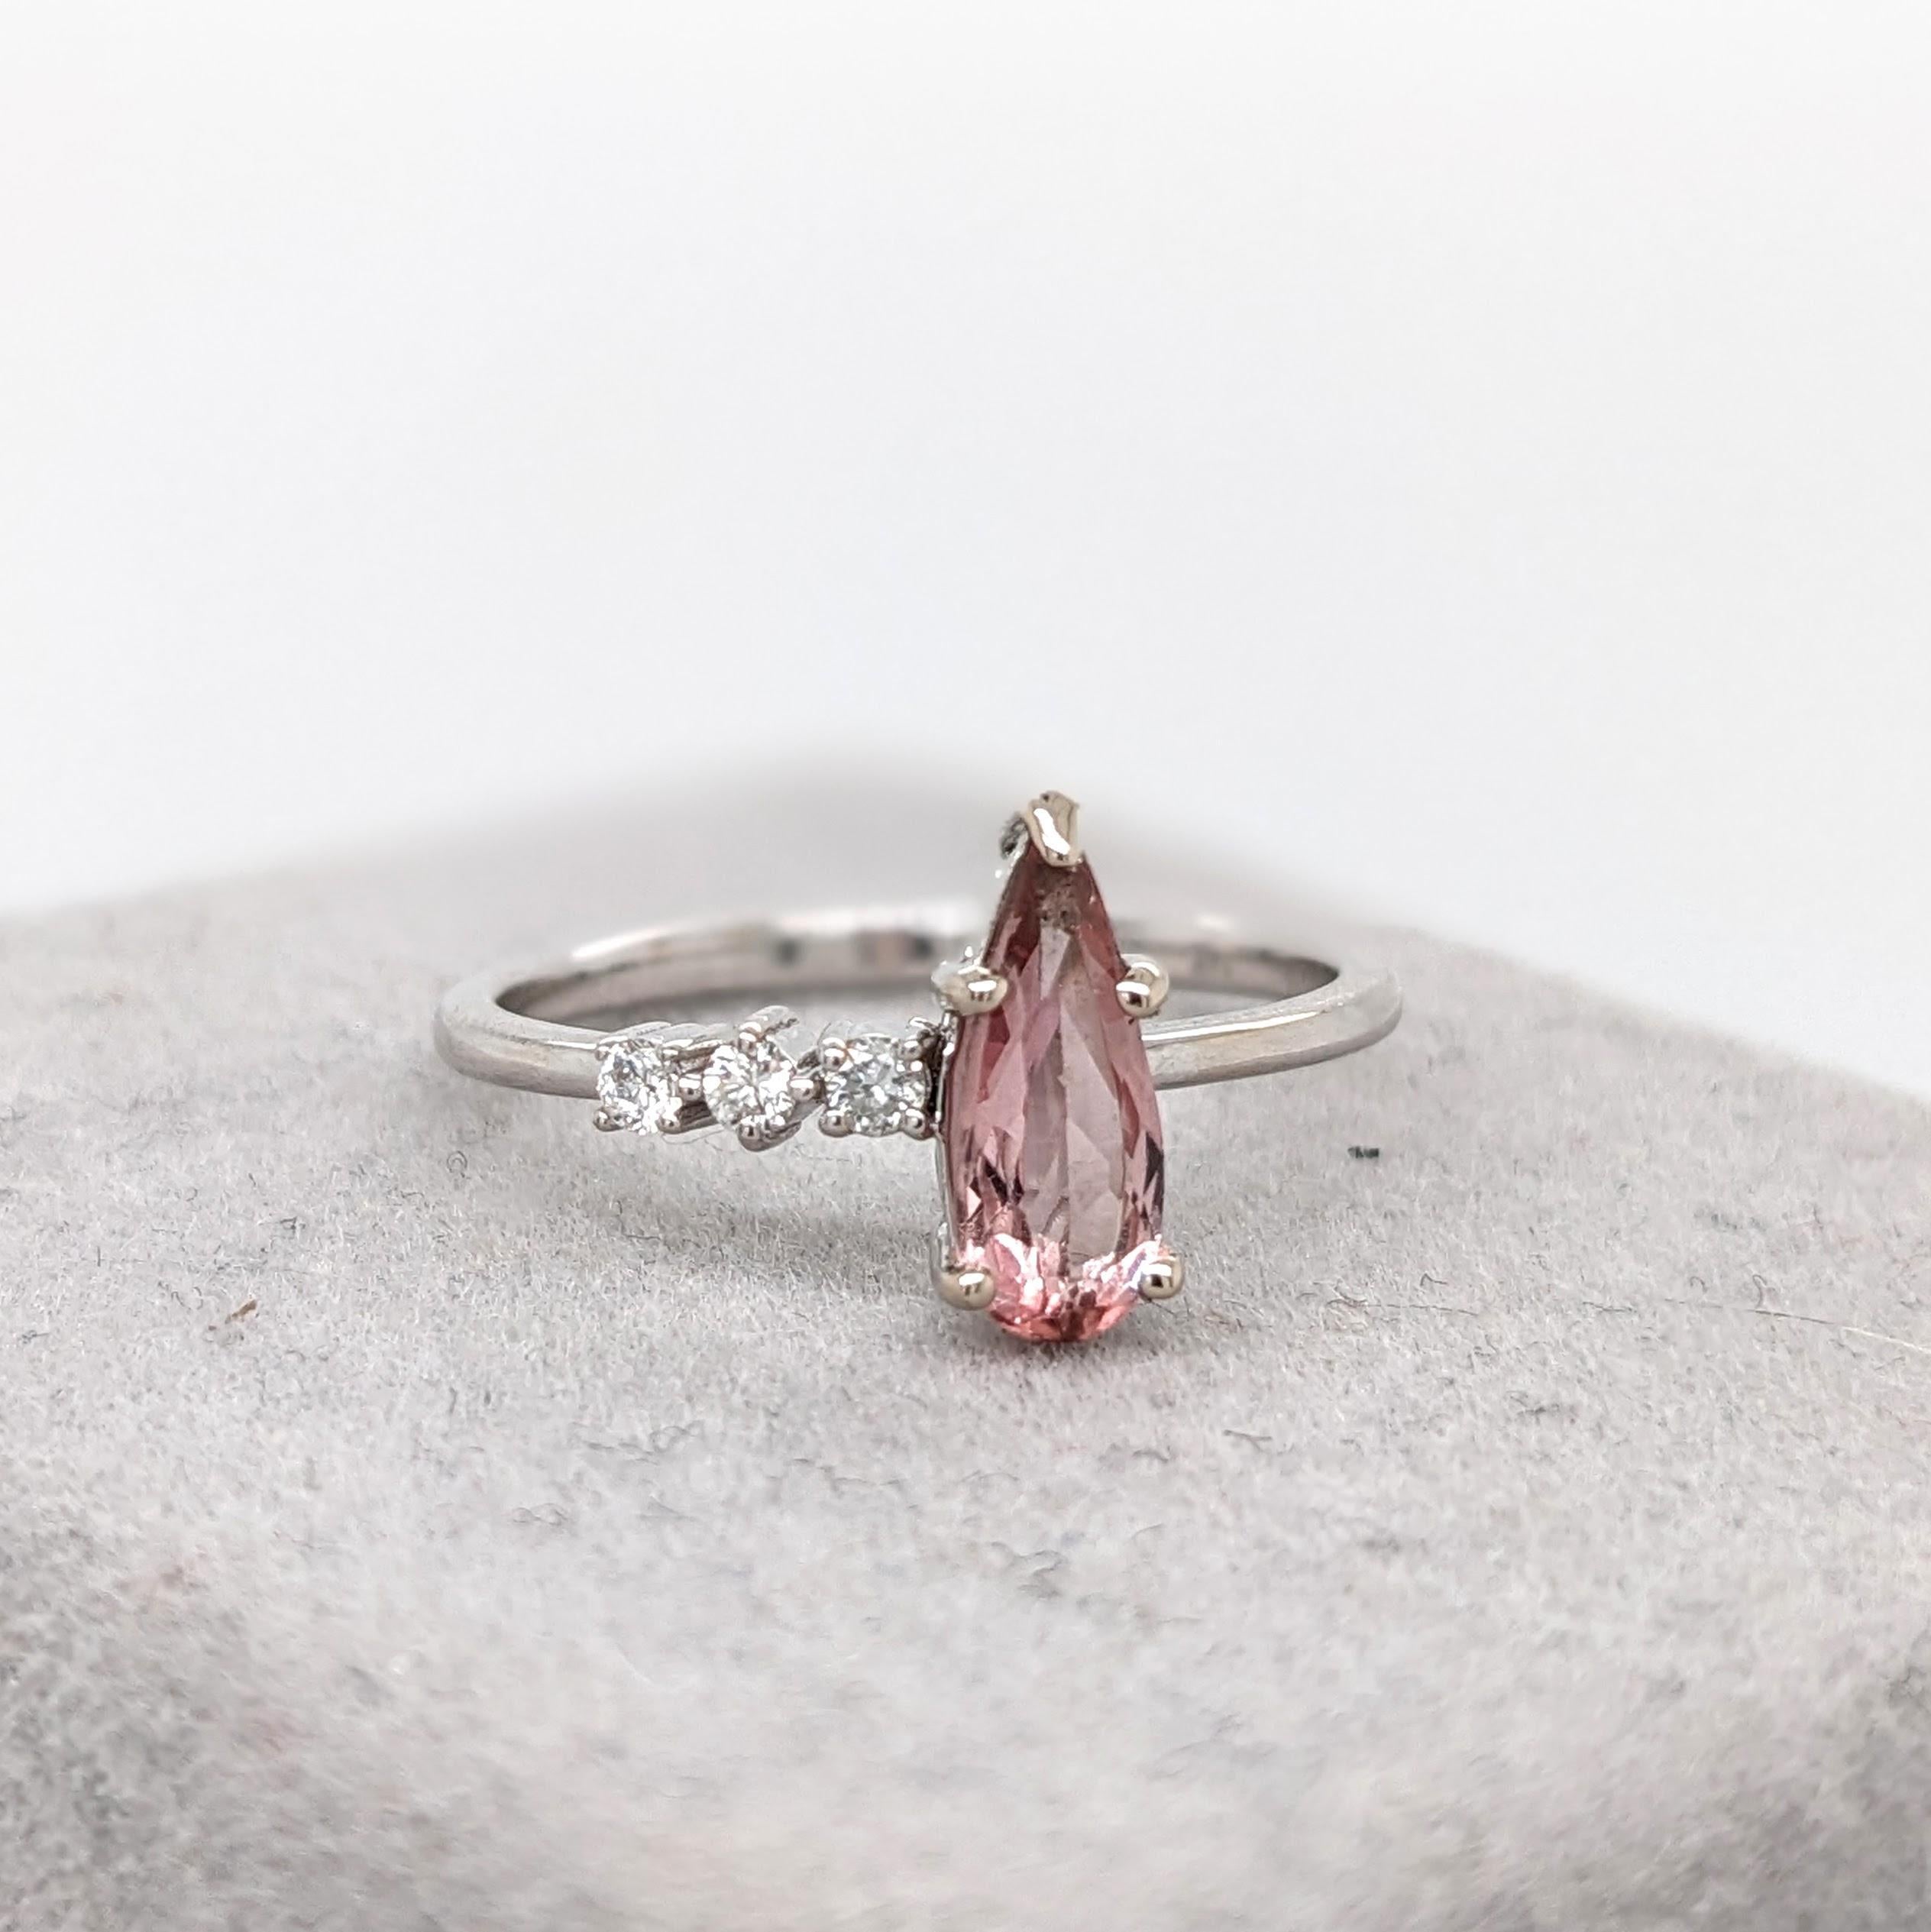 Imperial Topaz pear shaped stone mounted on a 14k white gold band with round natural diamond accents. This ring features a beautiful 0.68 ct blush colored imperial topaz, accented by natural earth mined diamonds and solid 14k white gold! This ring